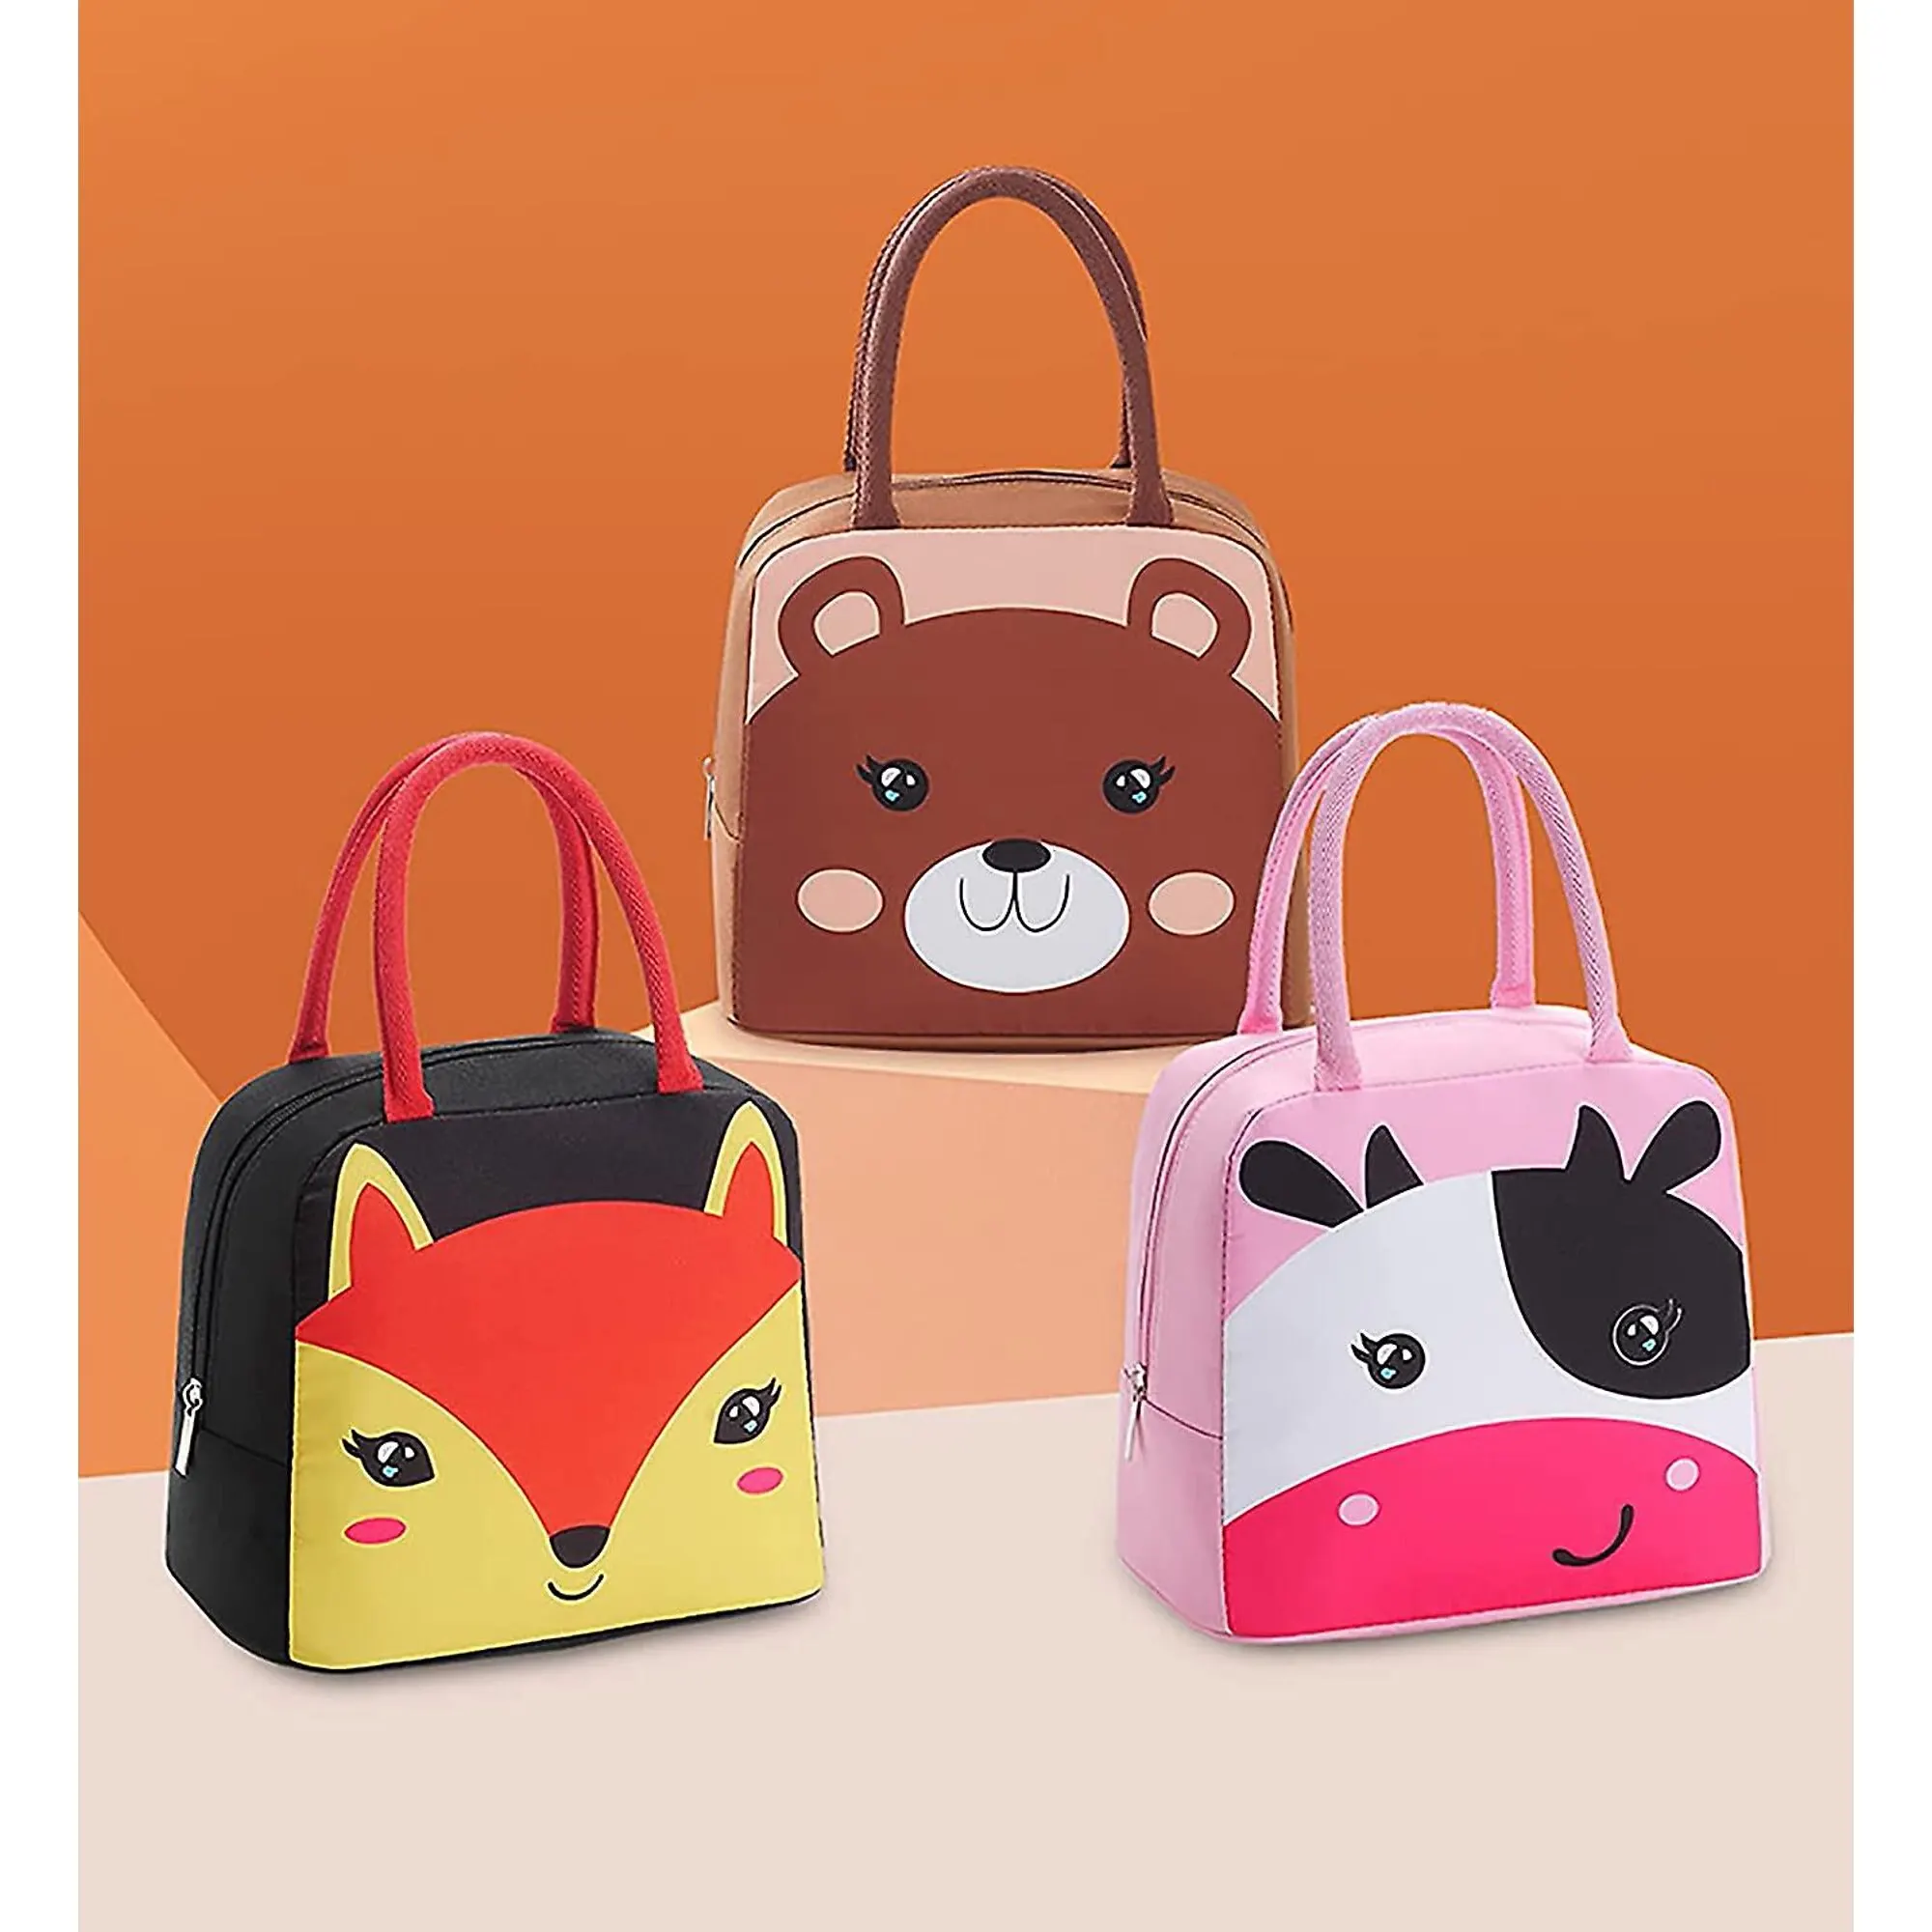 Bear Thermal Insulated Lunch Bag Box Portable Reusable Lunch Bag Cooler  Tote Lunch Bag For Boys Girls School Office Picnic